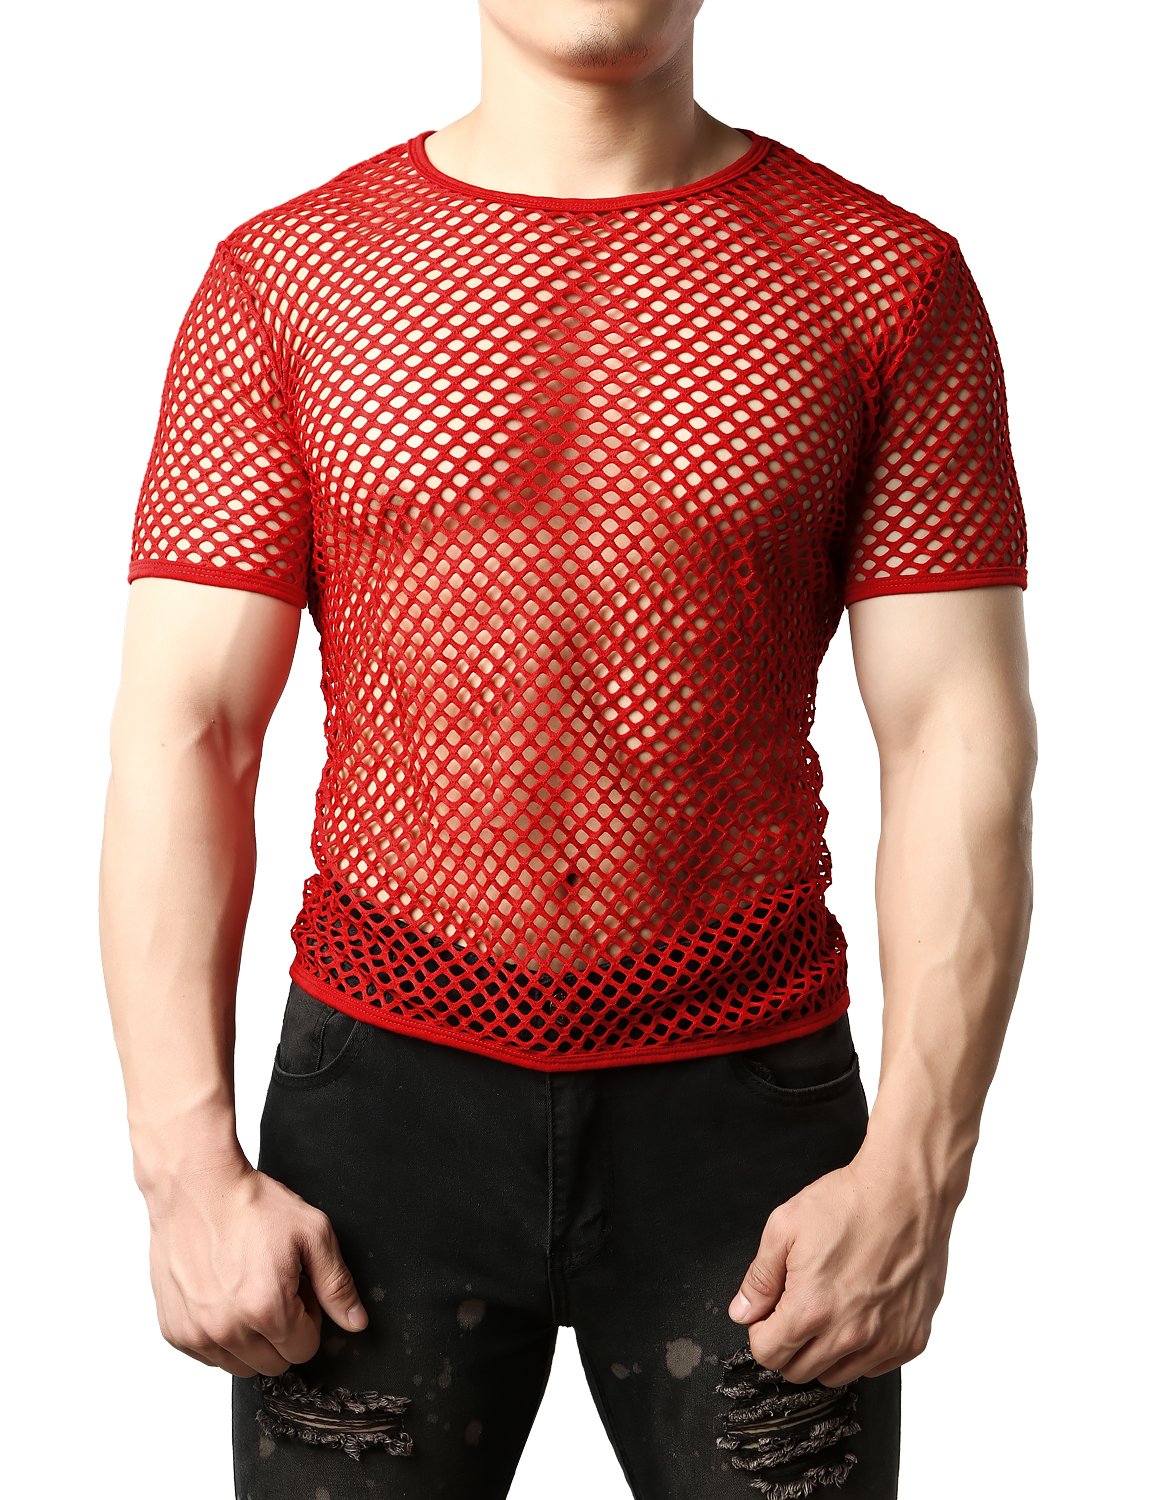 JOGAL Men's Mesh Fishnet Fitted Muscle Top